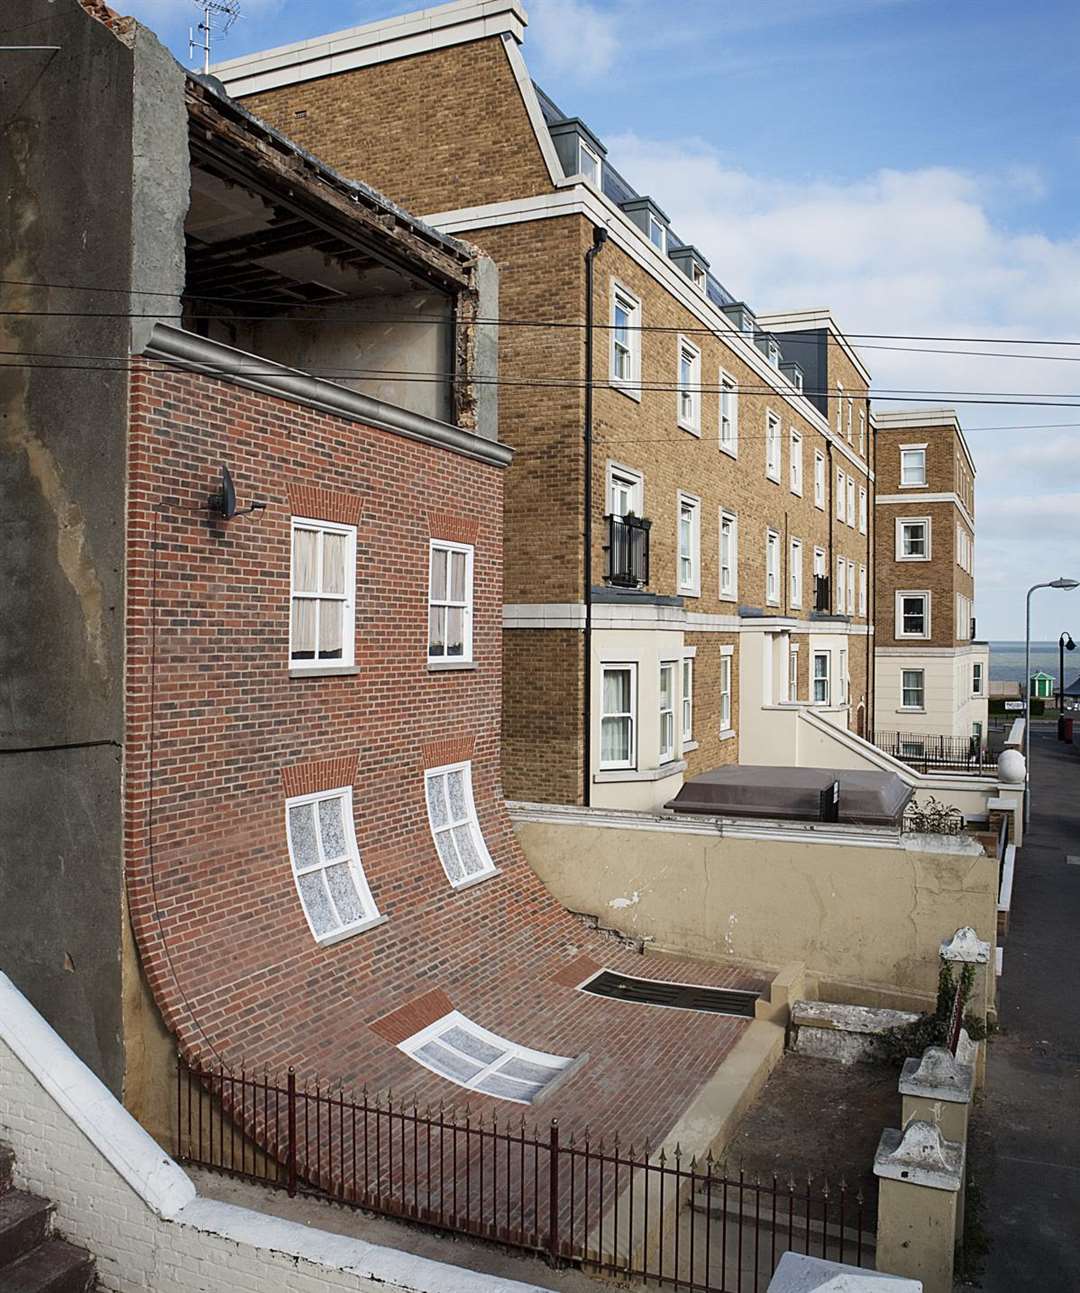 His sliding housefront in Margate propelled Alex Chinneck to Kent-wide fame